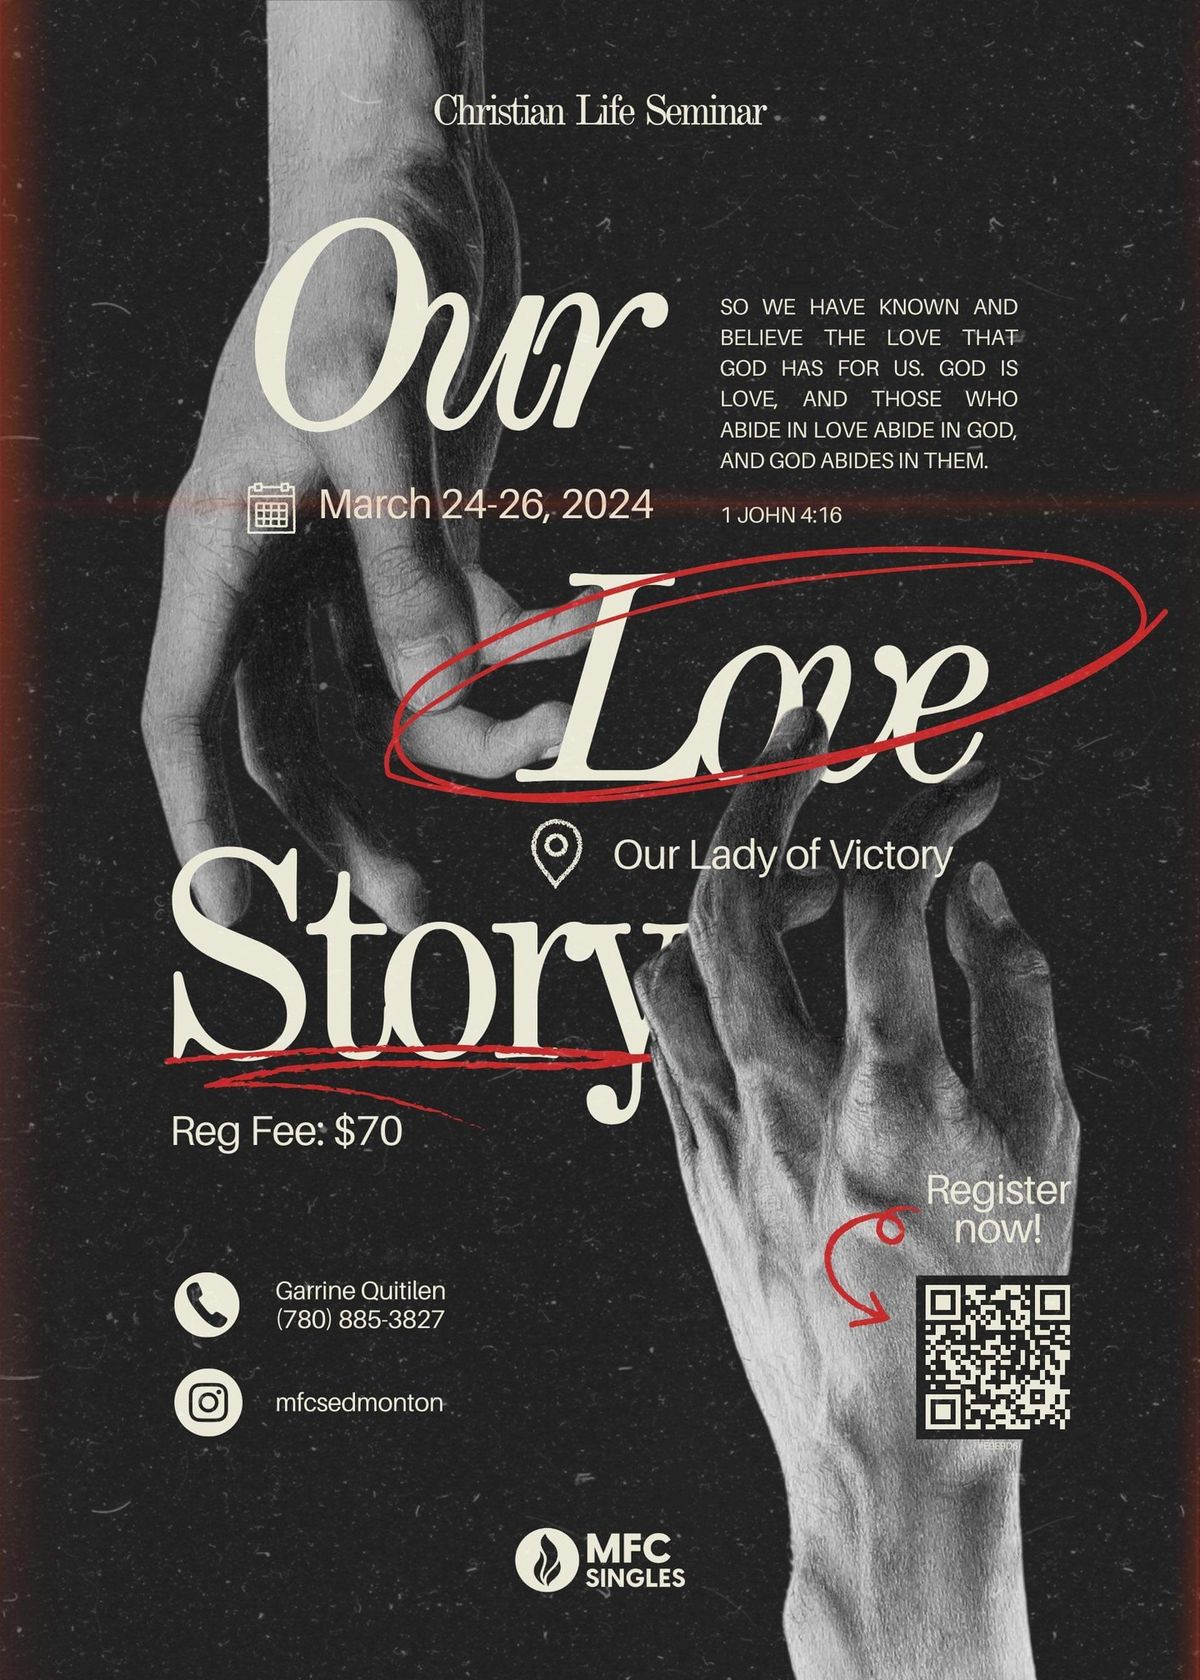 CLS: Our Love Story